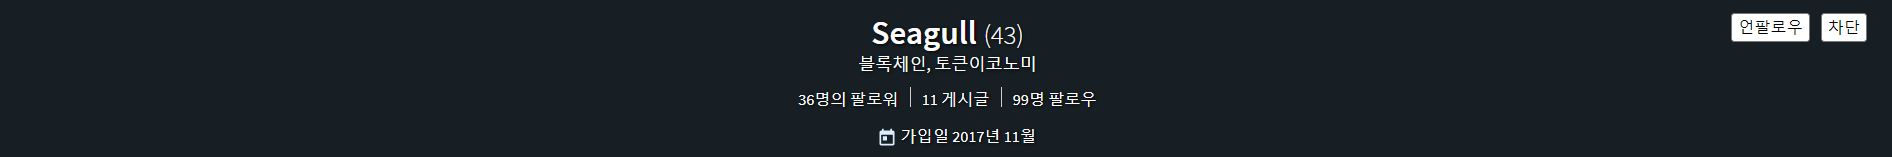 20180509_seagull.png